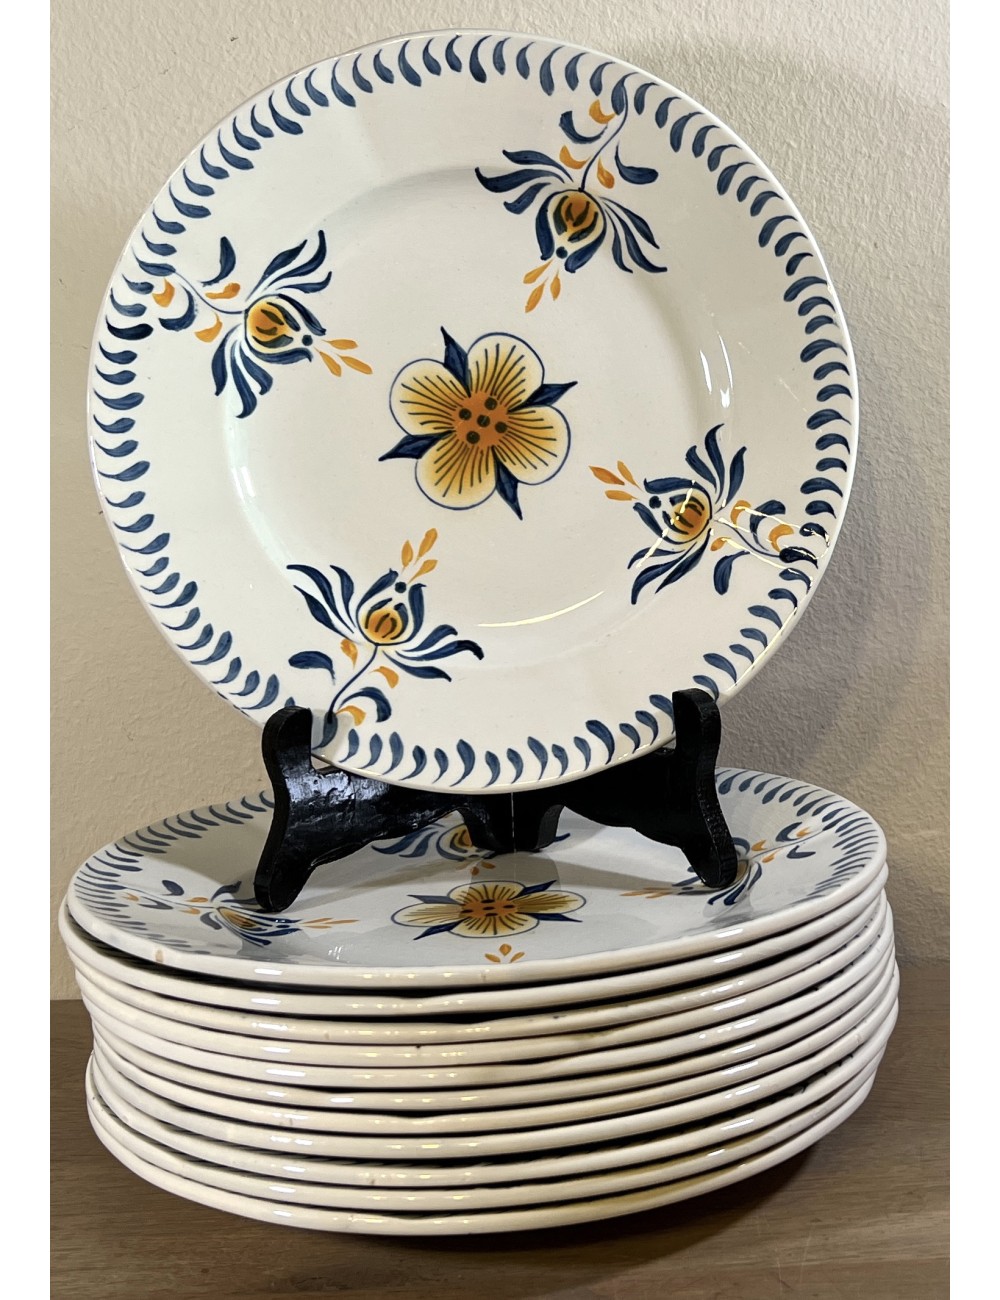 Breakfast plate / Dessert plate - Sarreguemines - décor 3050A with processing in blue and orange